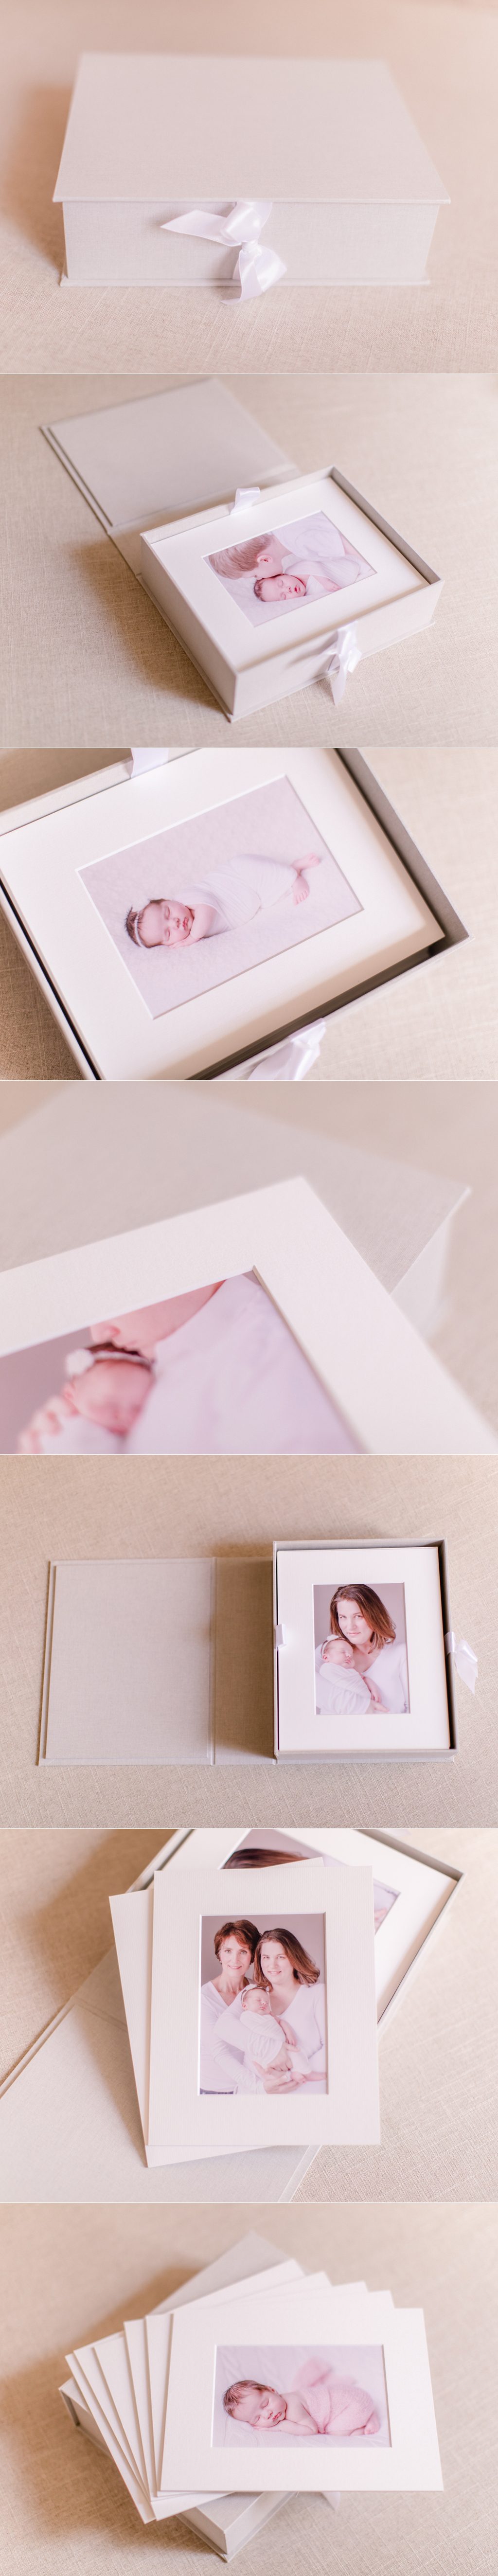 Newborn photography product, the Fine Art Image Box, offered by Athens, GA photographers.